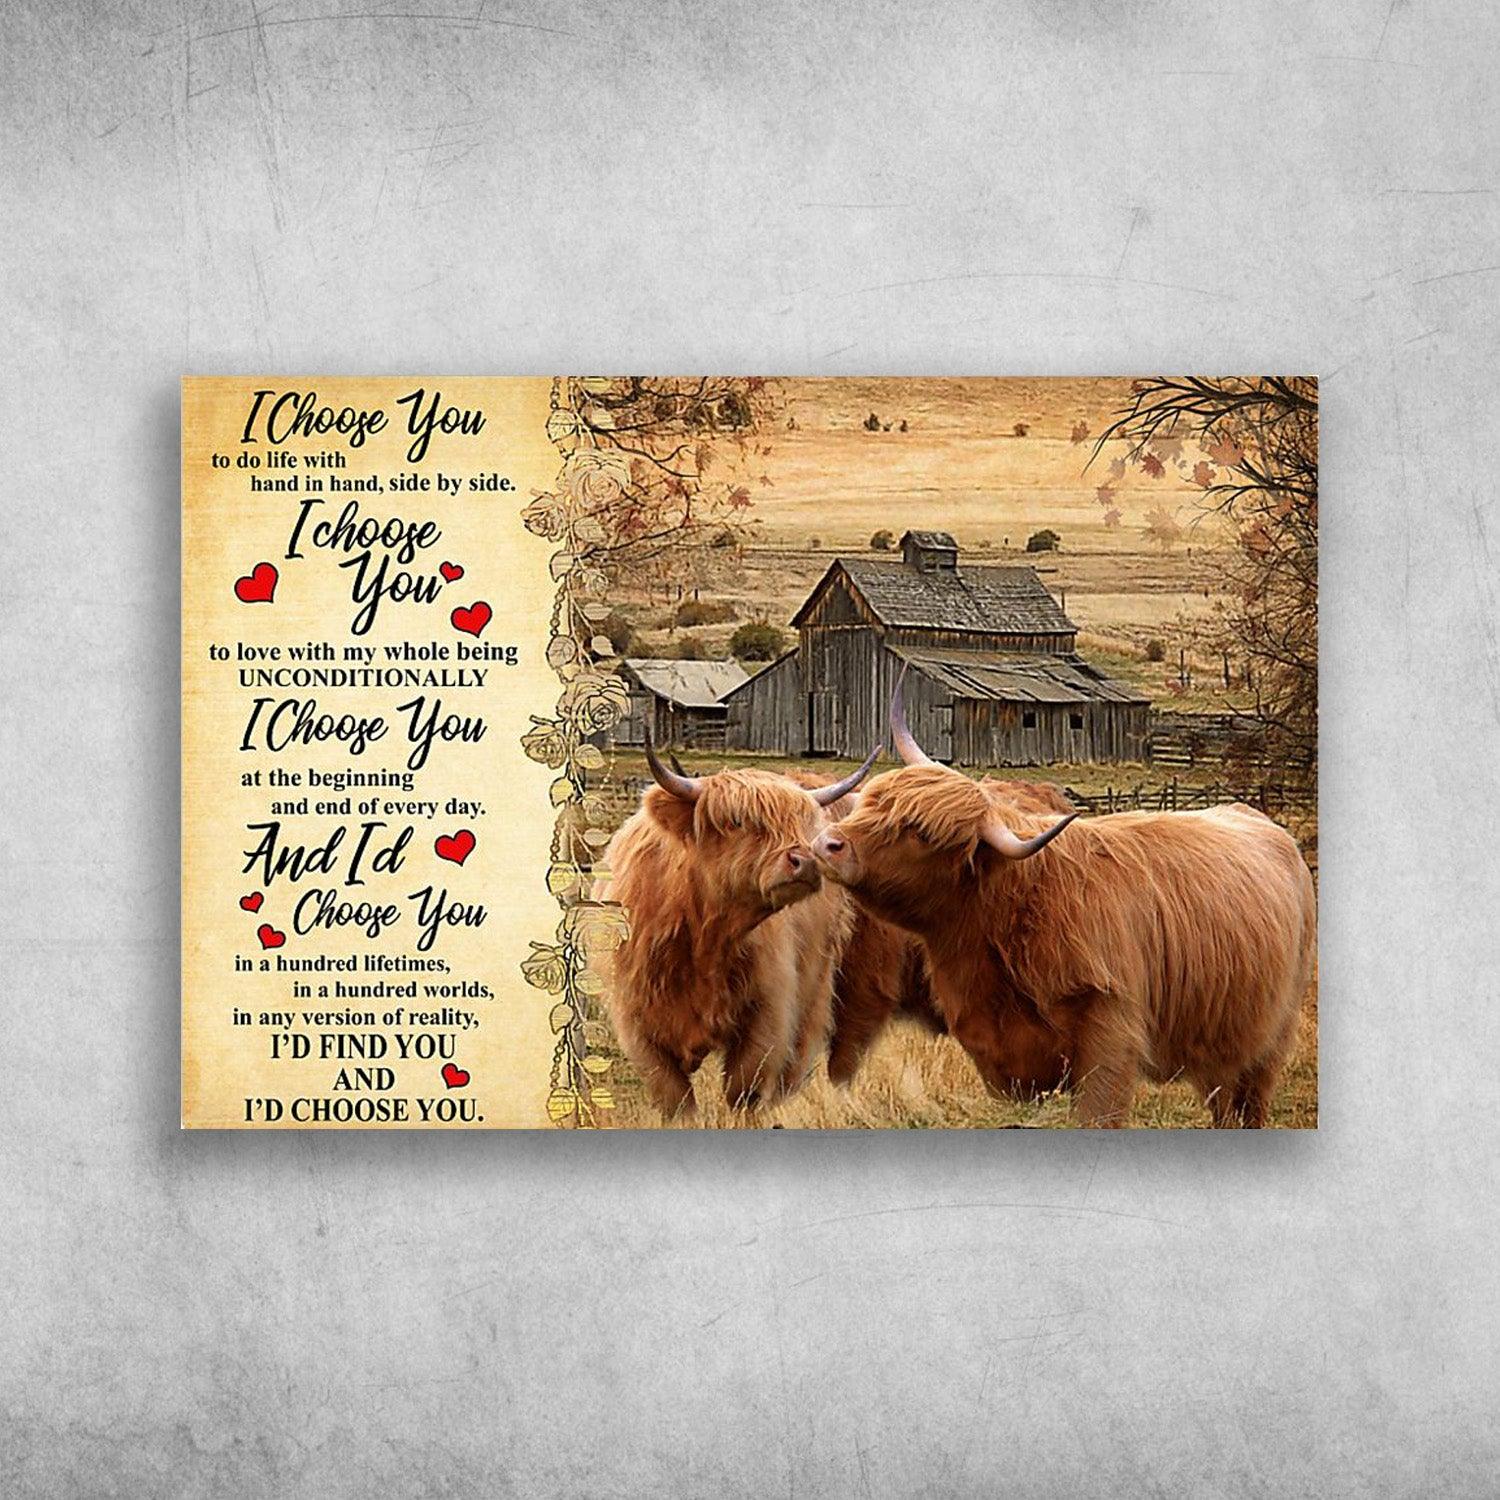 Cow Landscape Canvas - Higland Cattle I Choose You To Do Life With Hand In Hand Side By Side - Gift For Couple, Husband, Wife, Girlfriend, Boyfriend - Amzanimalsgift